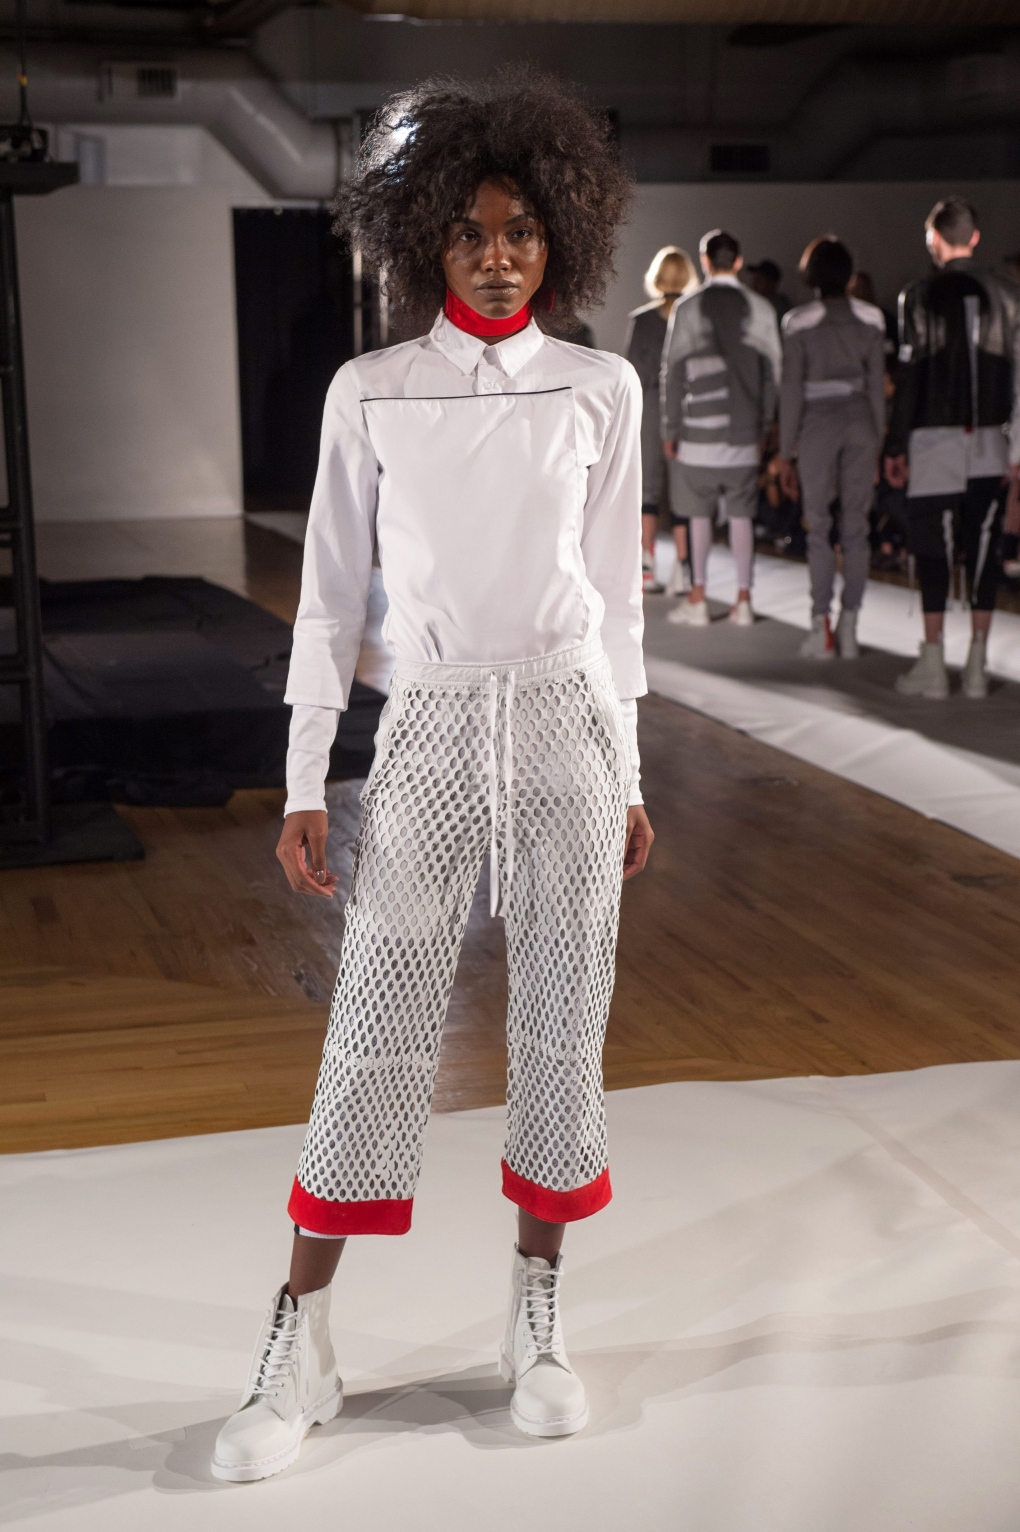 Pyer Moss collection at New York Fashion Week